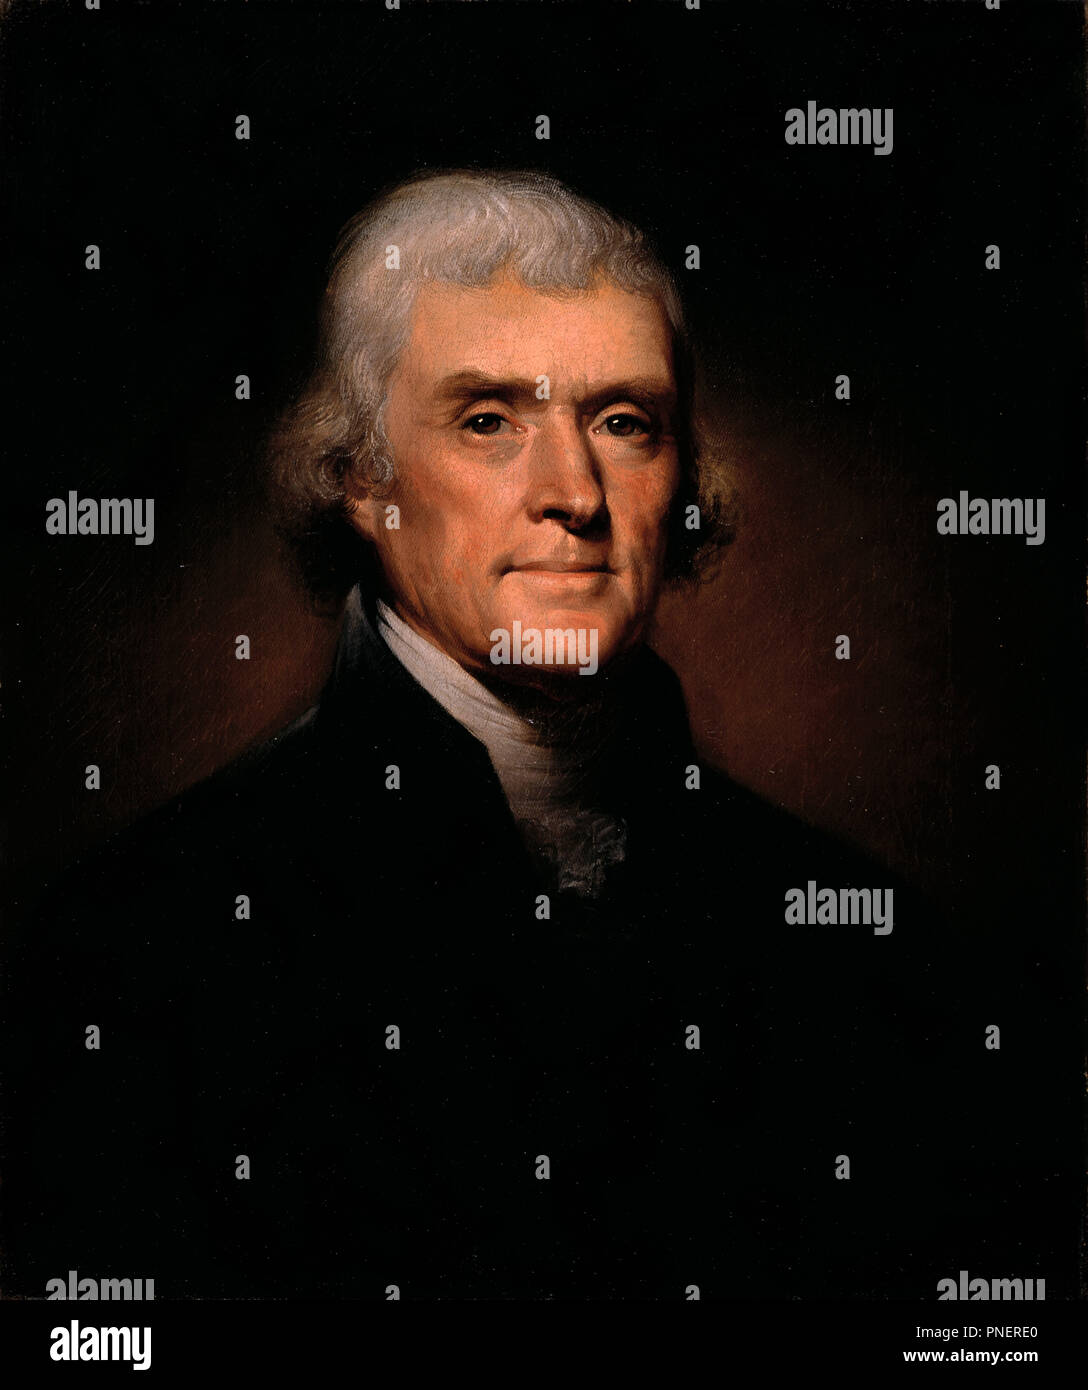 Thomas Jefferson. Date/Period: 1800. Painting. Oil on canvas Oil on canvas. Height: 587.50 mm (23.13 in); Width: 488.95 mm (19.25 in). Author: REMBRANDT PEALE. Stock Photo